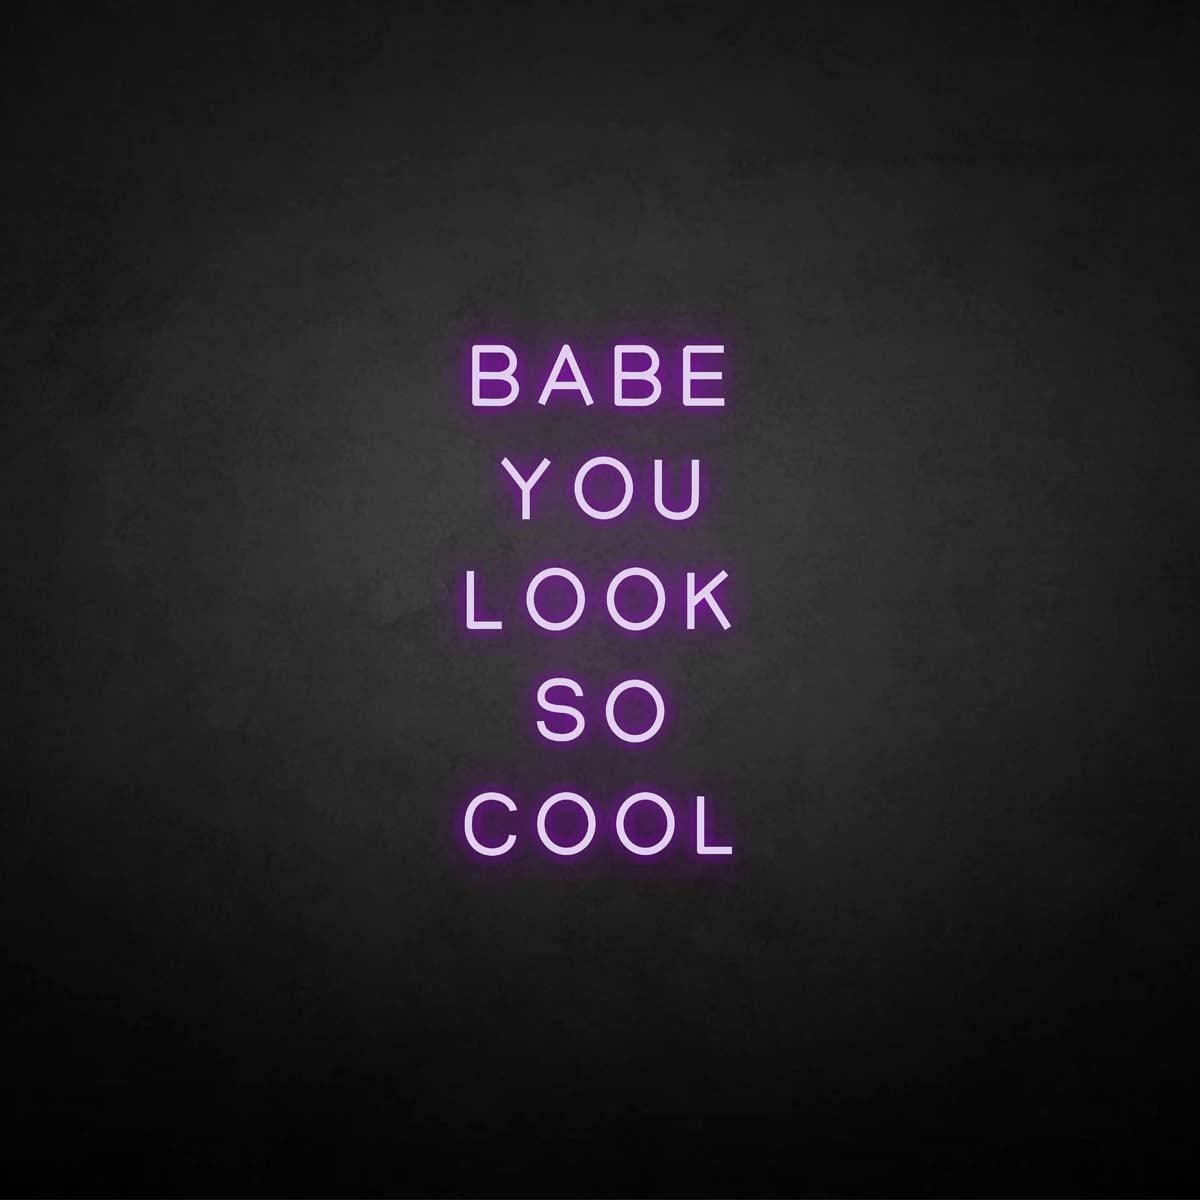 'BABE YOU LOOK SO COOL' neon sign